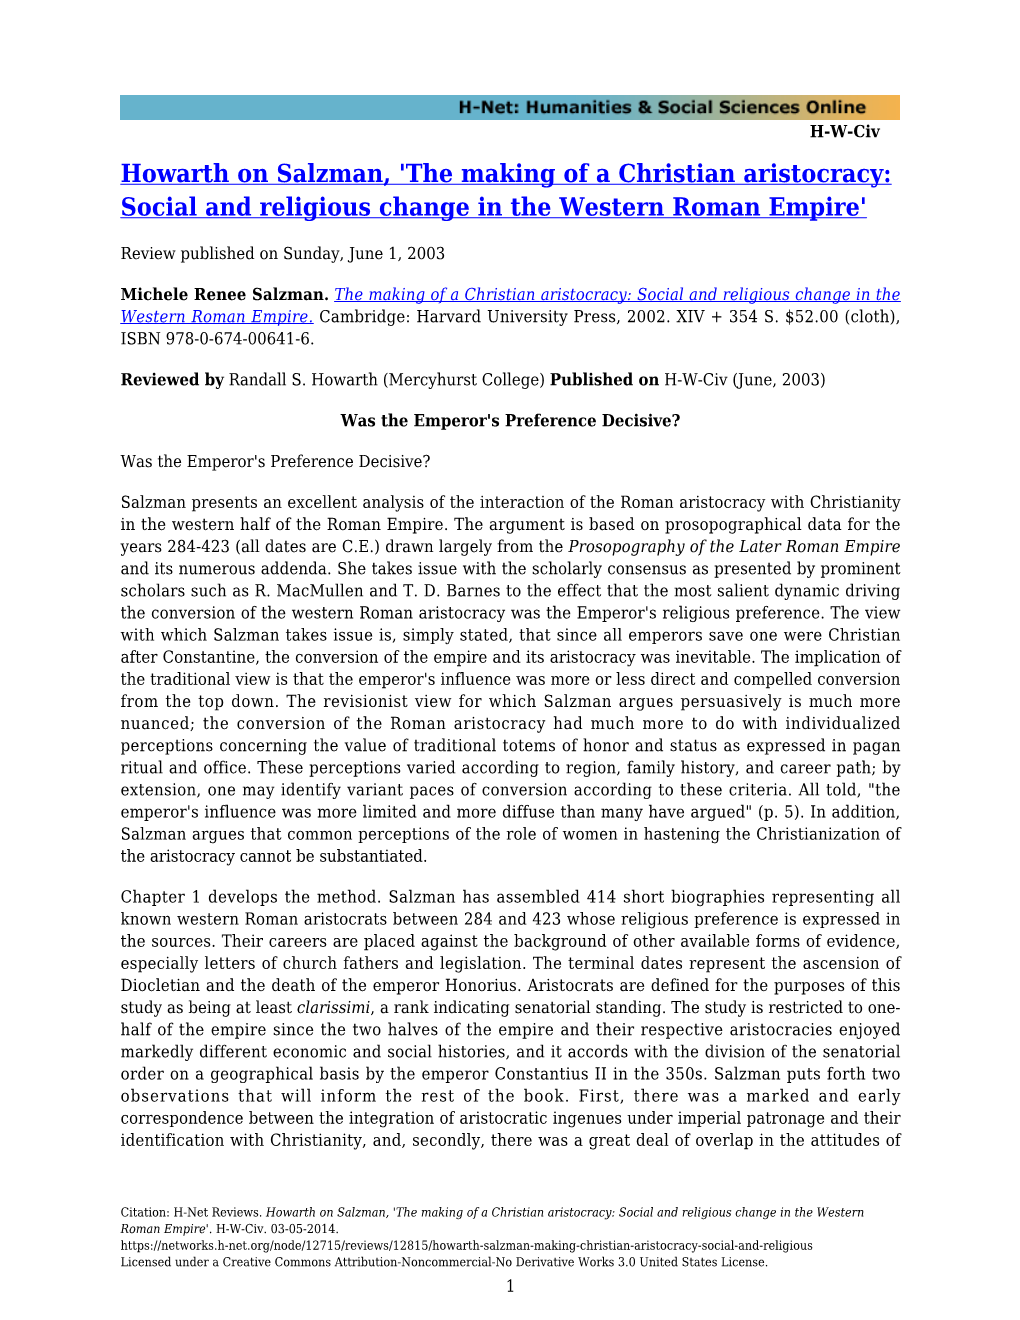 Howarth on Salzman, 'The Making of a Christian Aristocracy: Social and Religious Change in the Western Roman Empire'